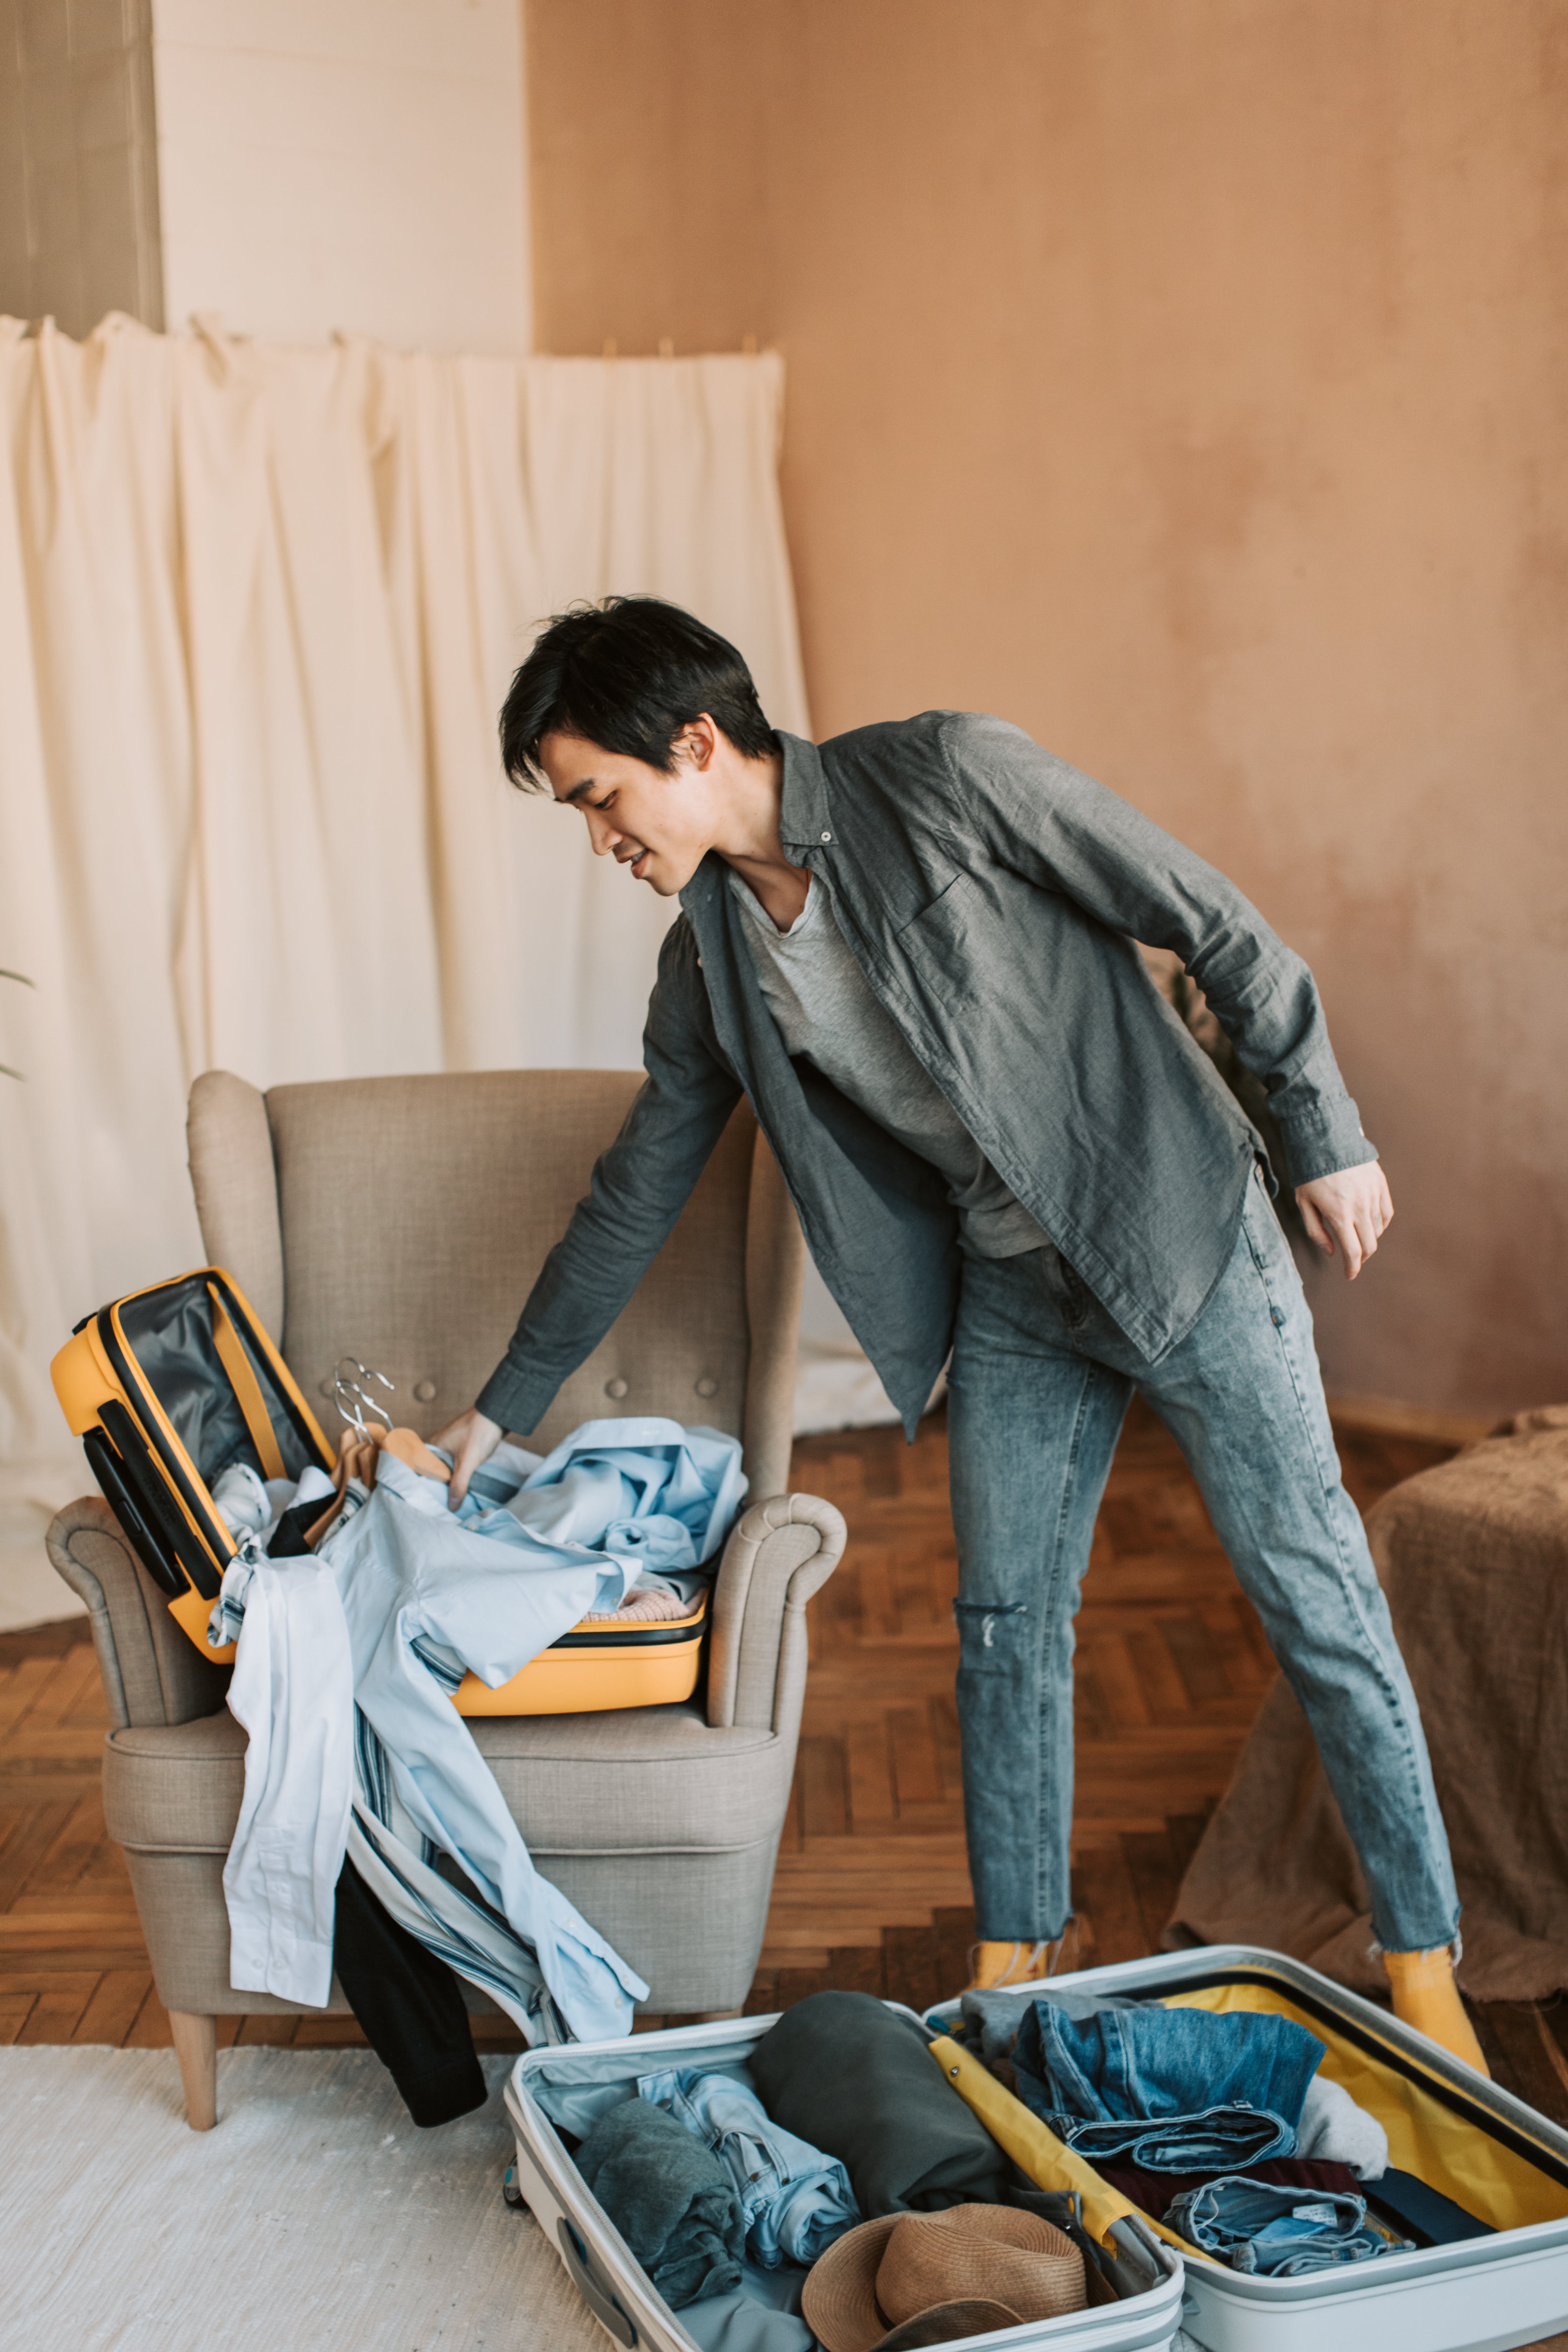 A man packing his clothes | Source: Pexels